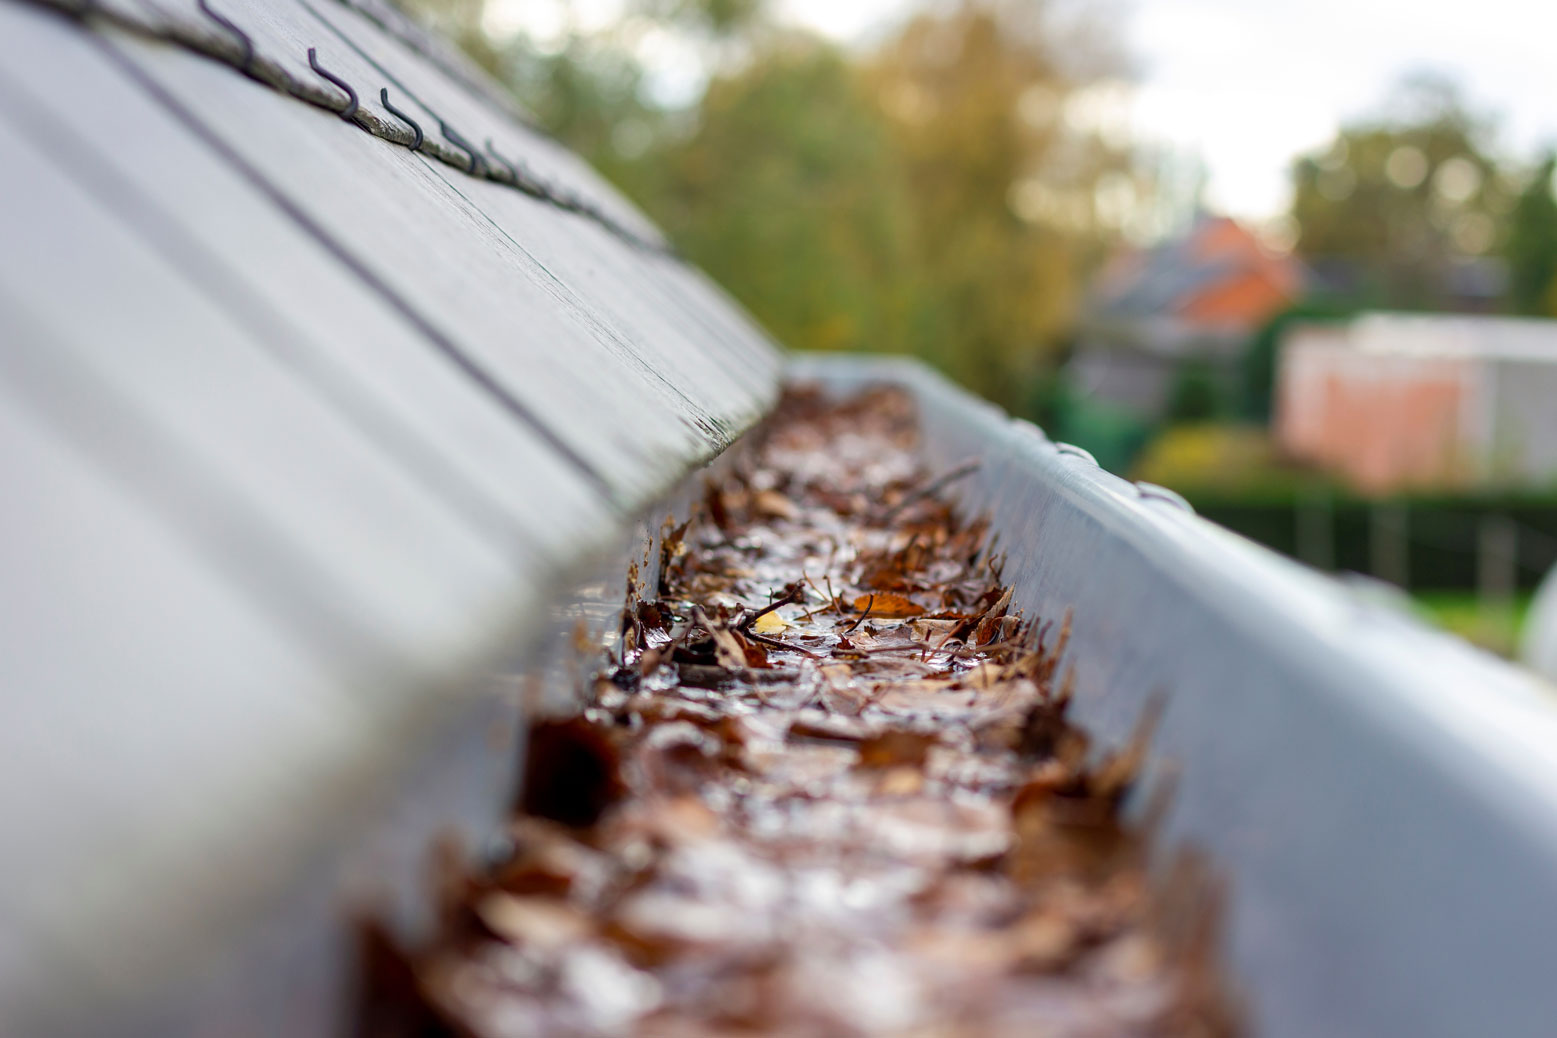 gutter cleaning in the fall